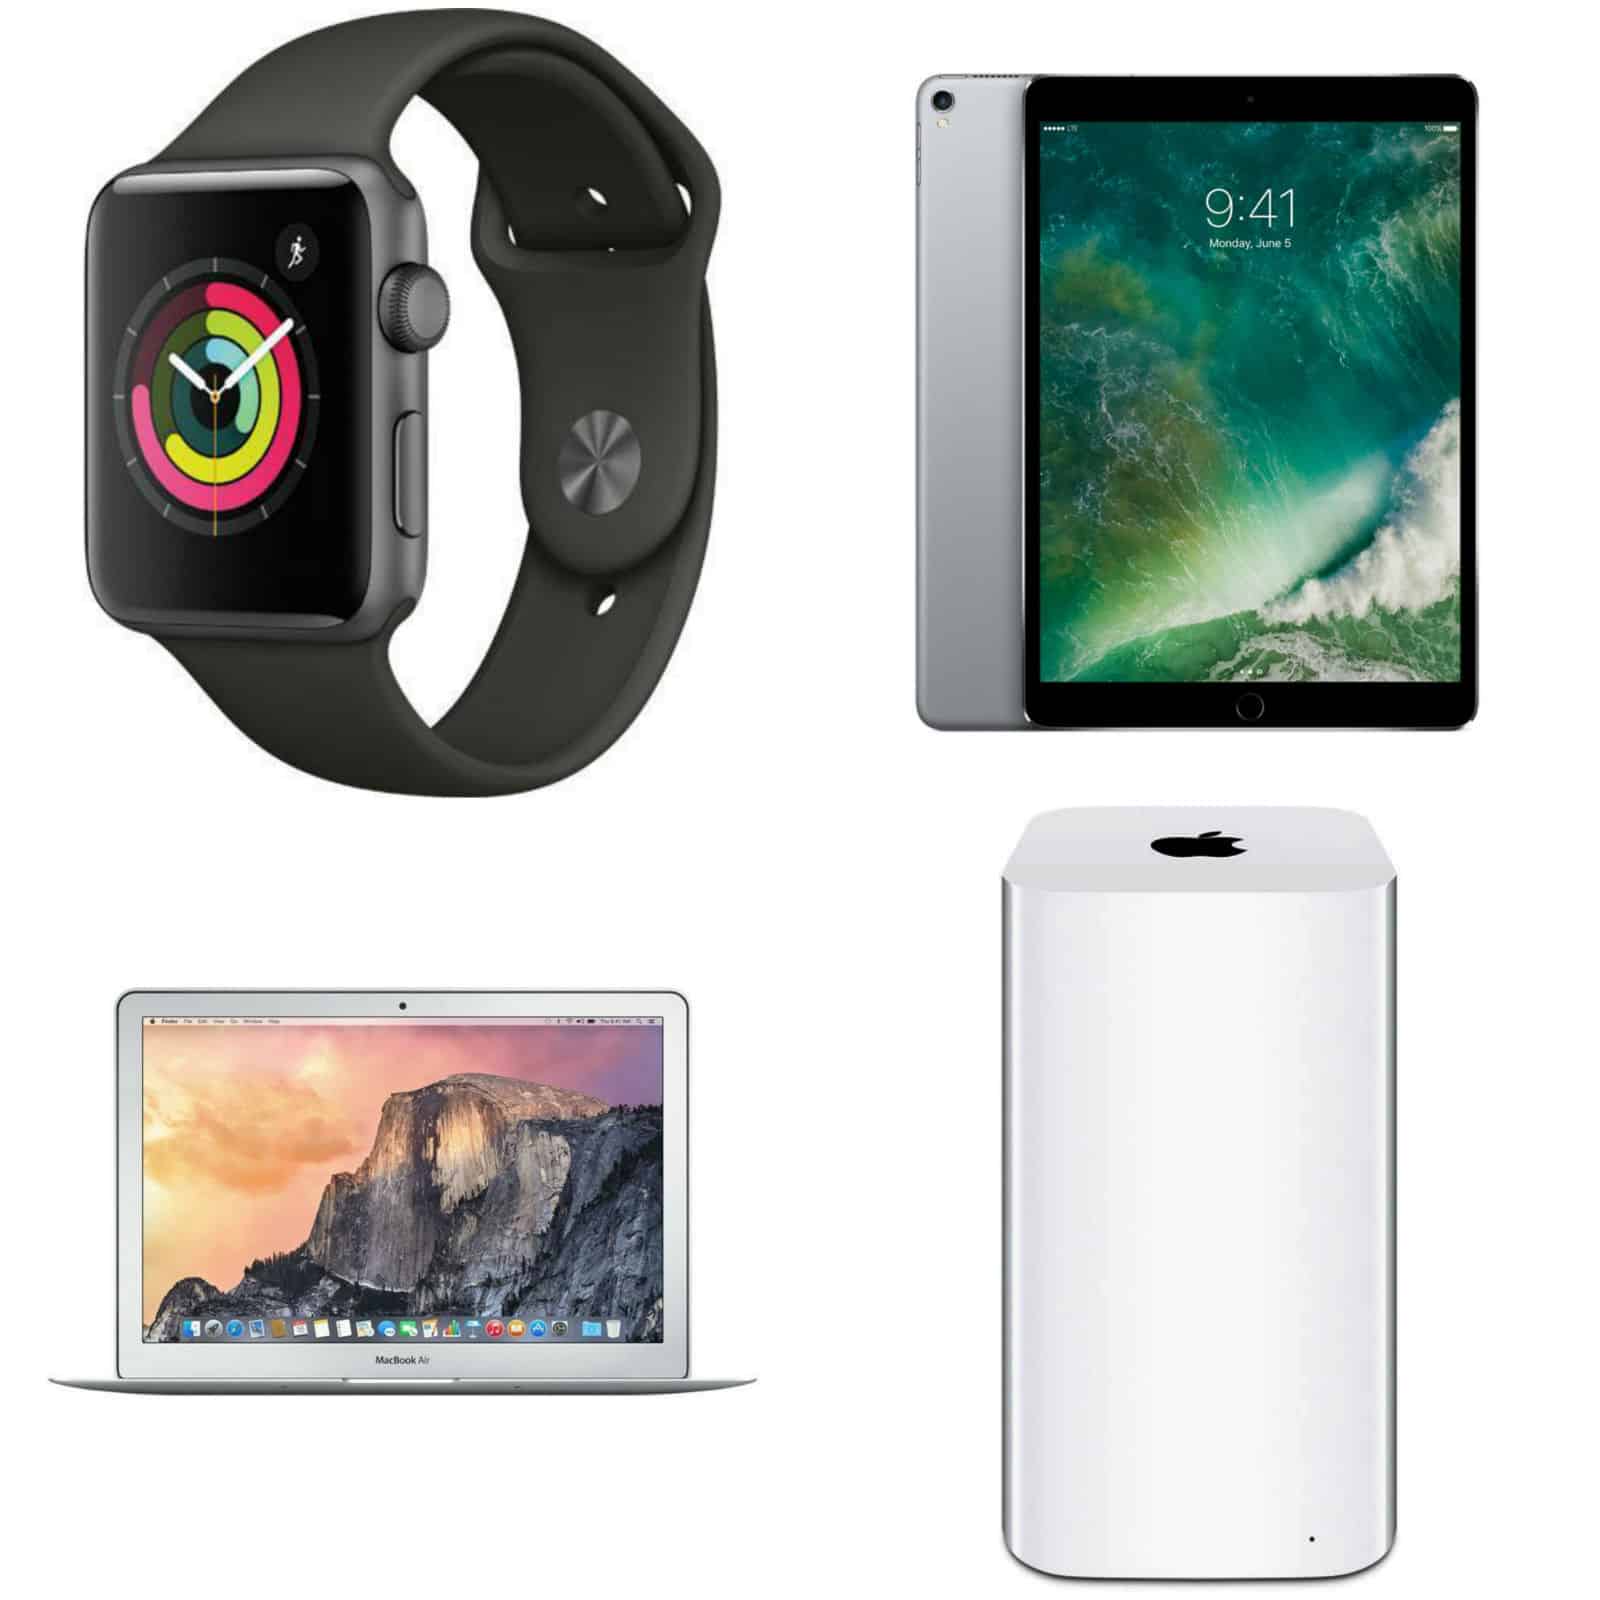 Expand your Apple ecosystem with this week's hottest Apple deals.